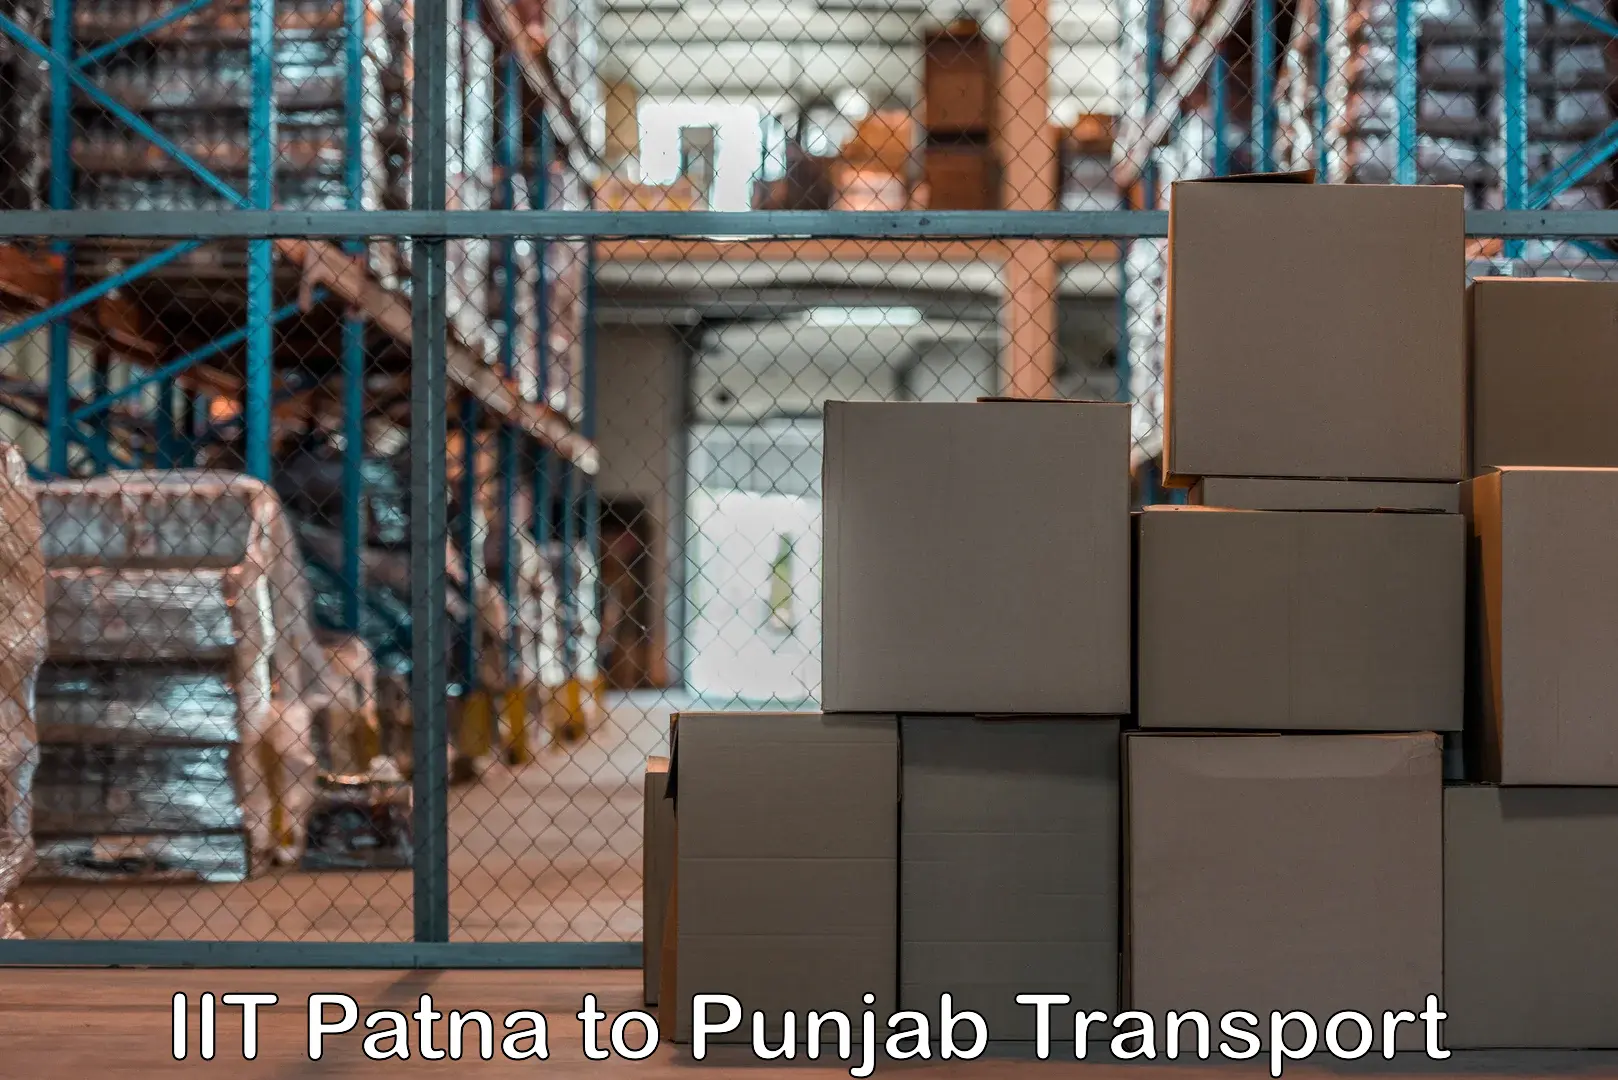 Vehicle transport services in IIT Patna to Amritsar